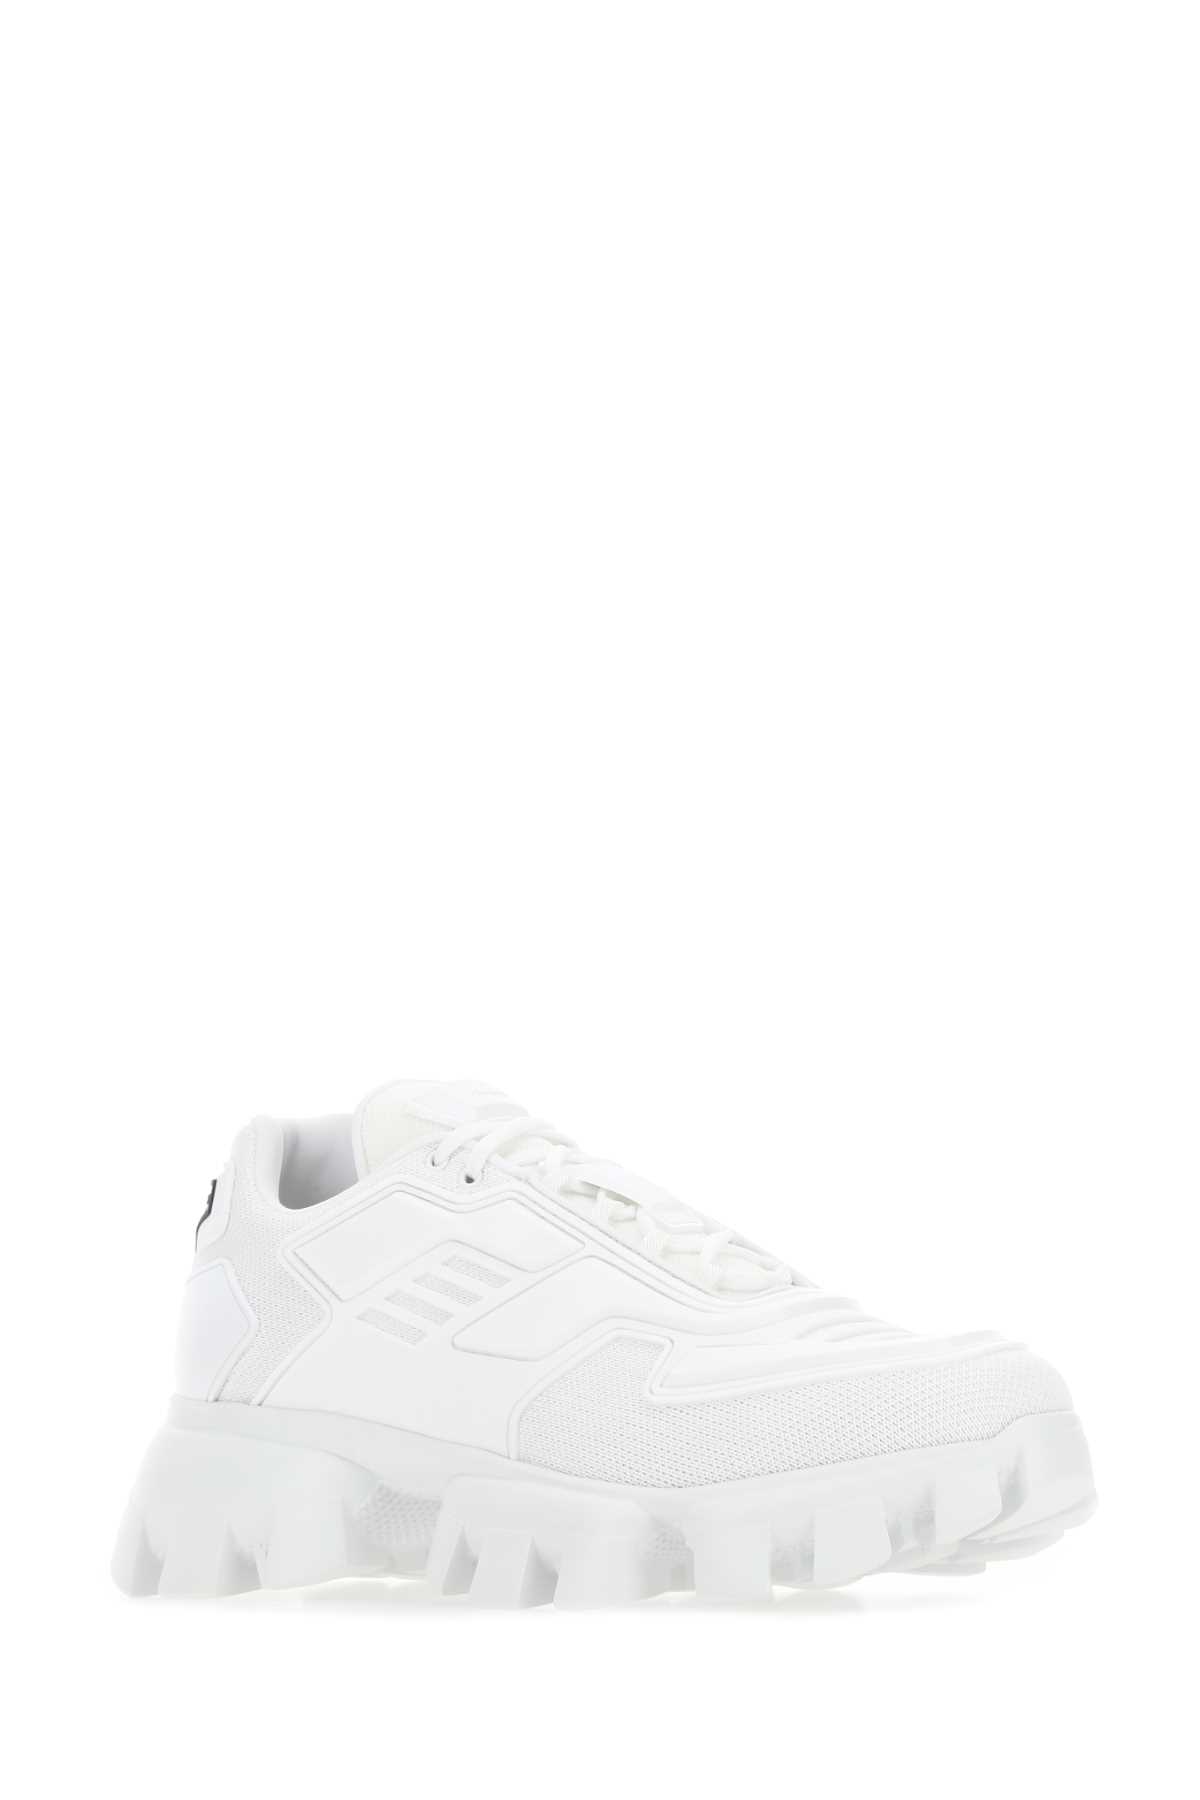 Prada White Rubber And Mesh Cloudbust Thunder Sneakers In F0009